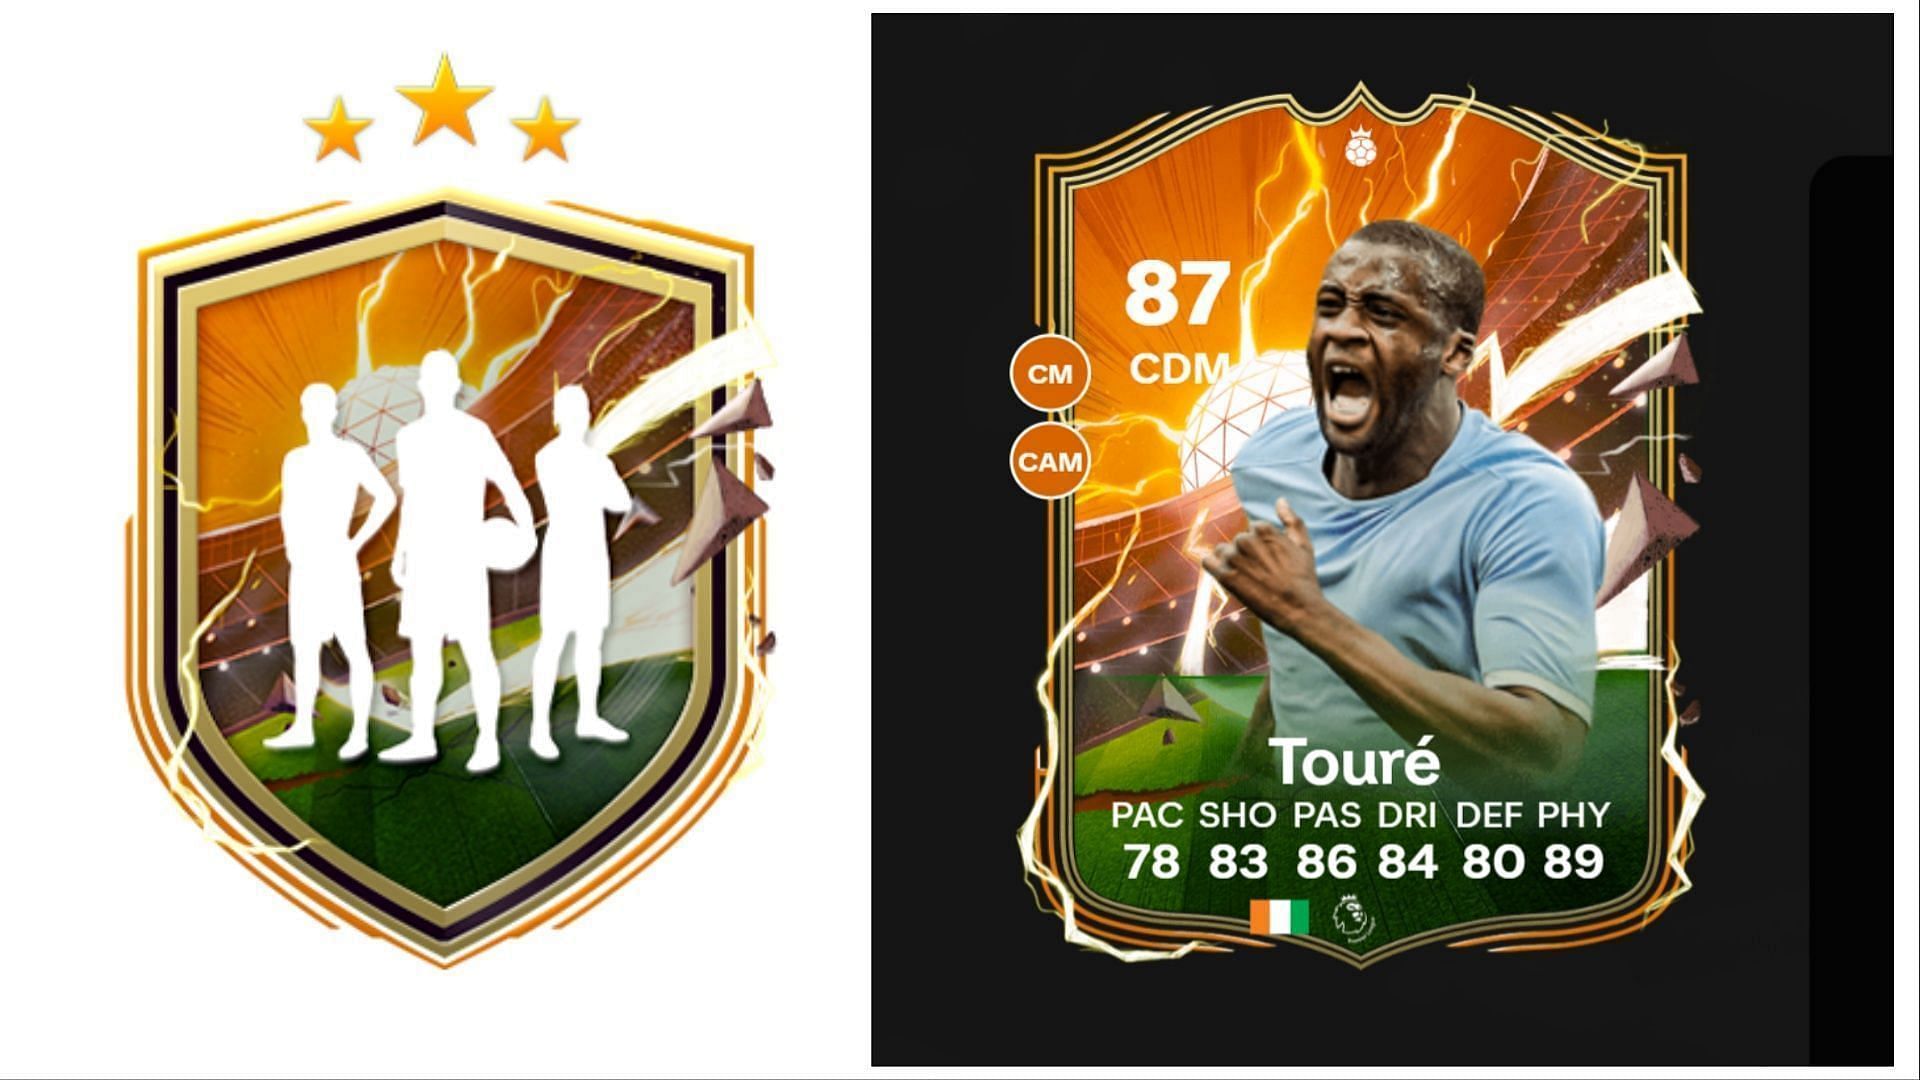 A new Hero SBC is available in EA FC 24 (Images via EA Sports)